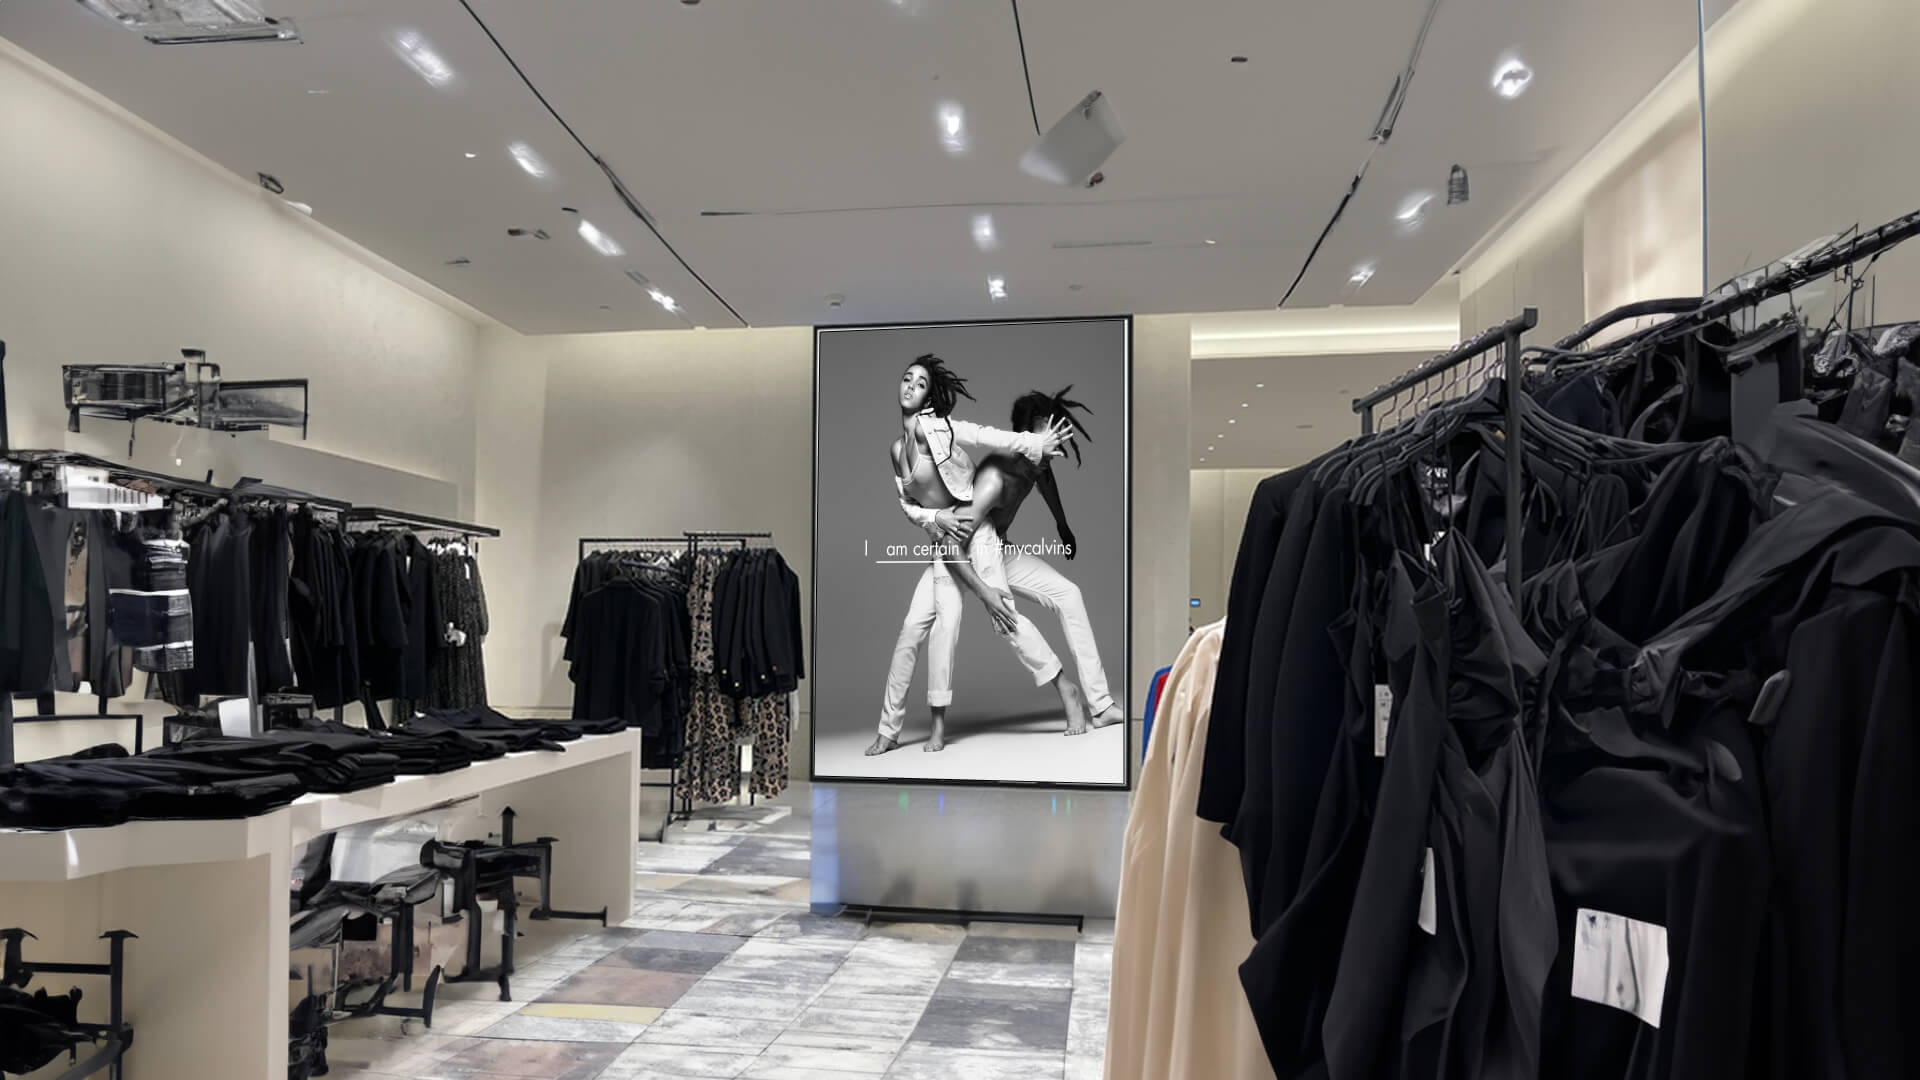 Representative image of a Calvin-Klein store showing the #MyCalvins campaign